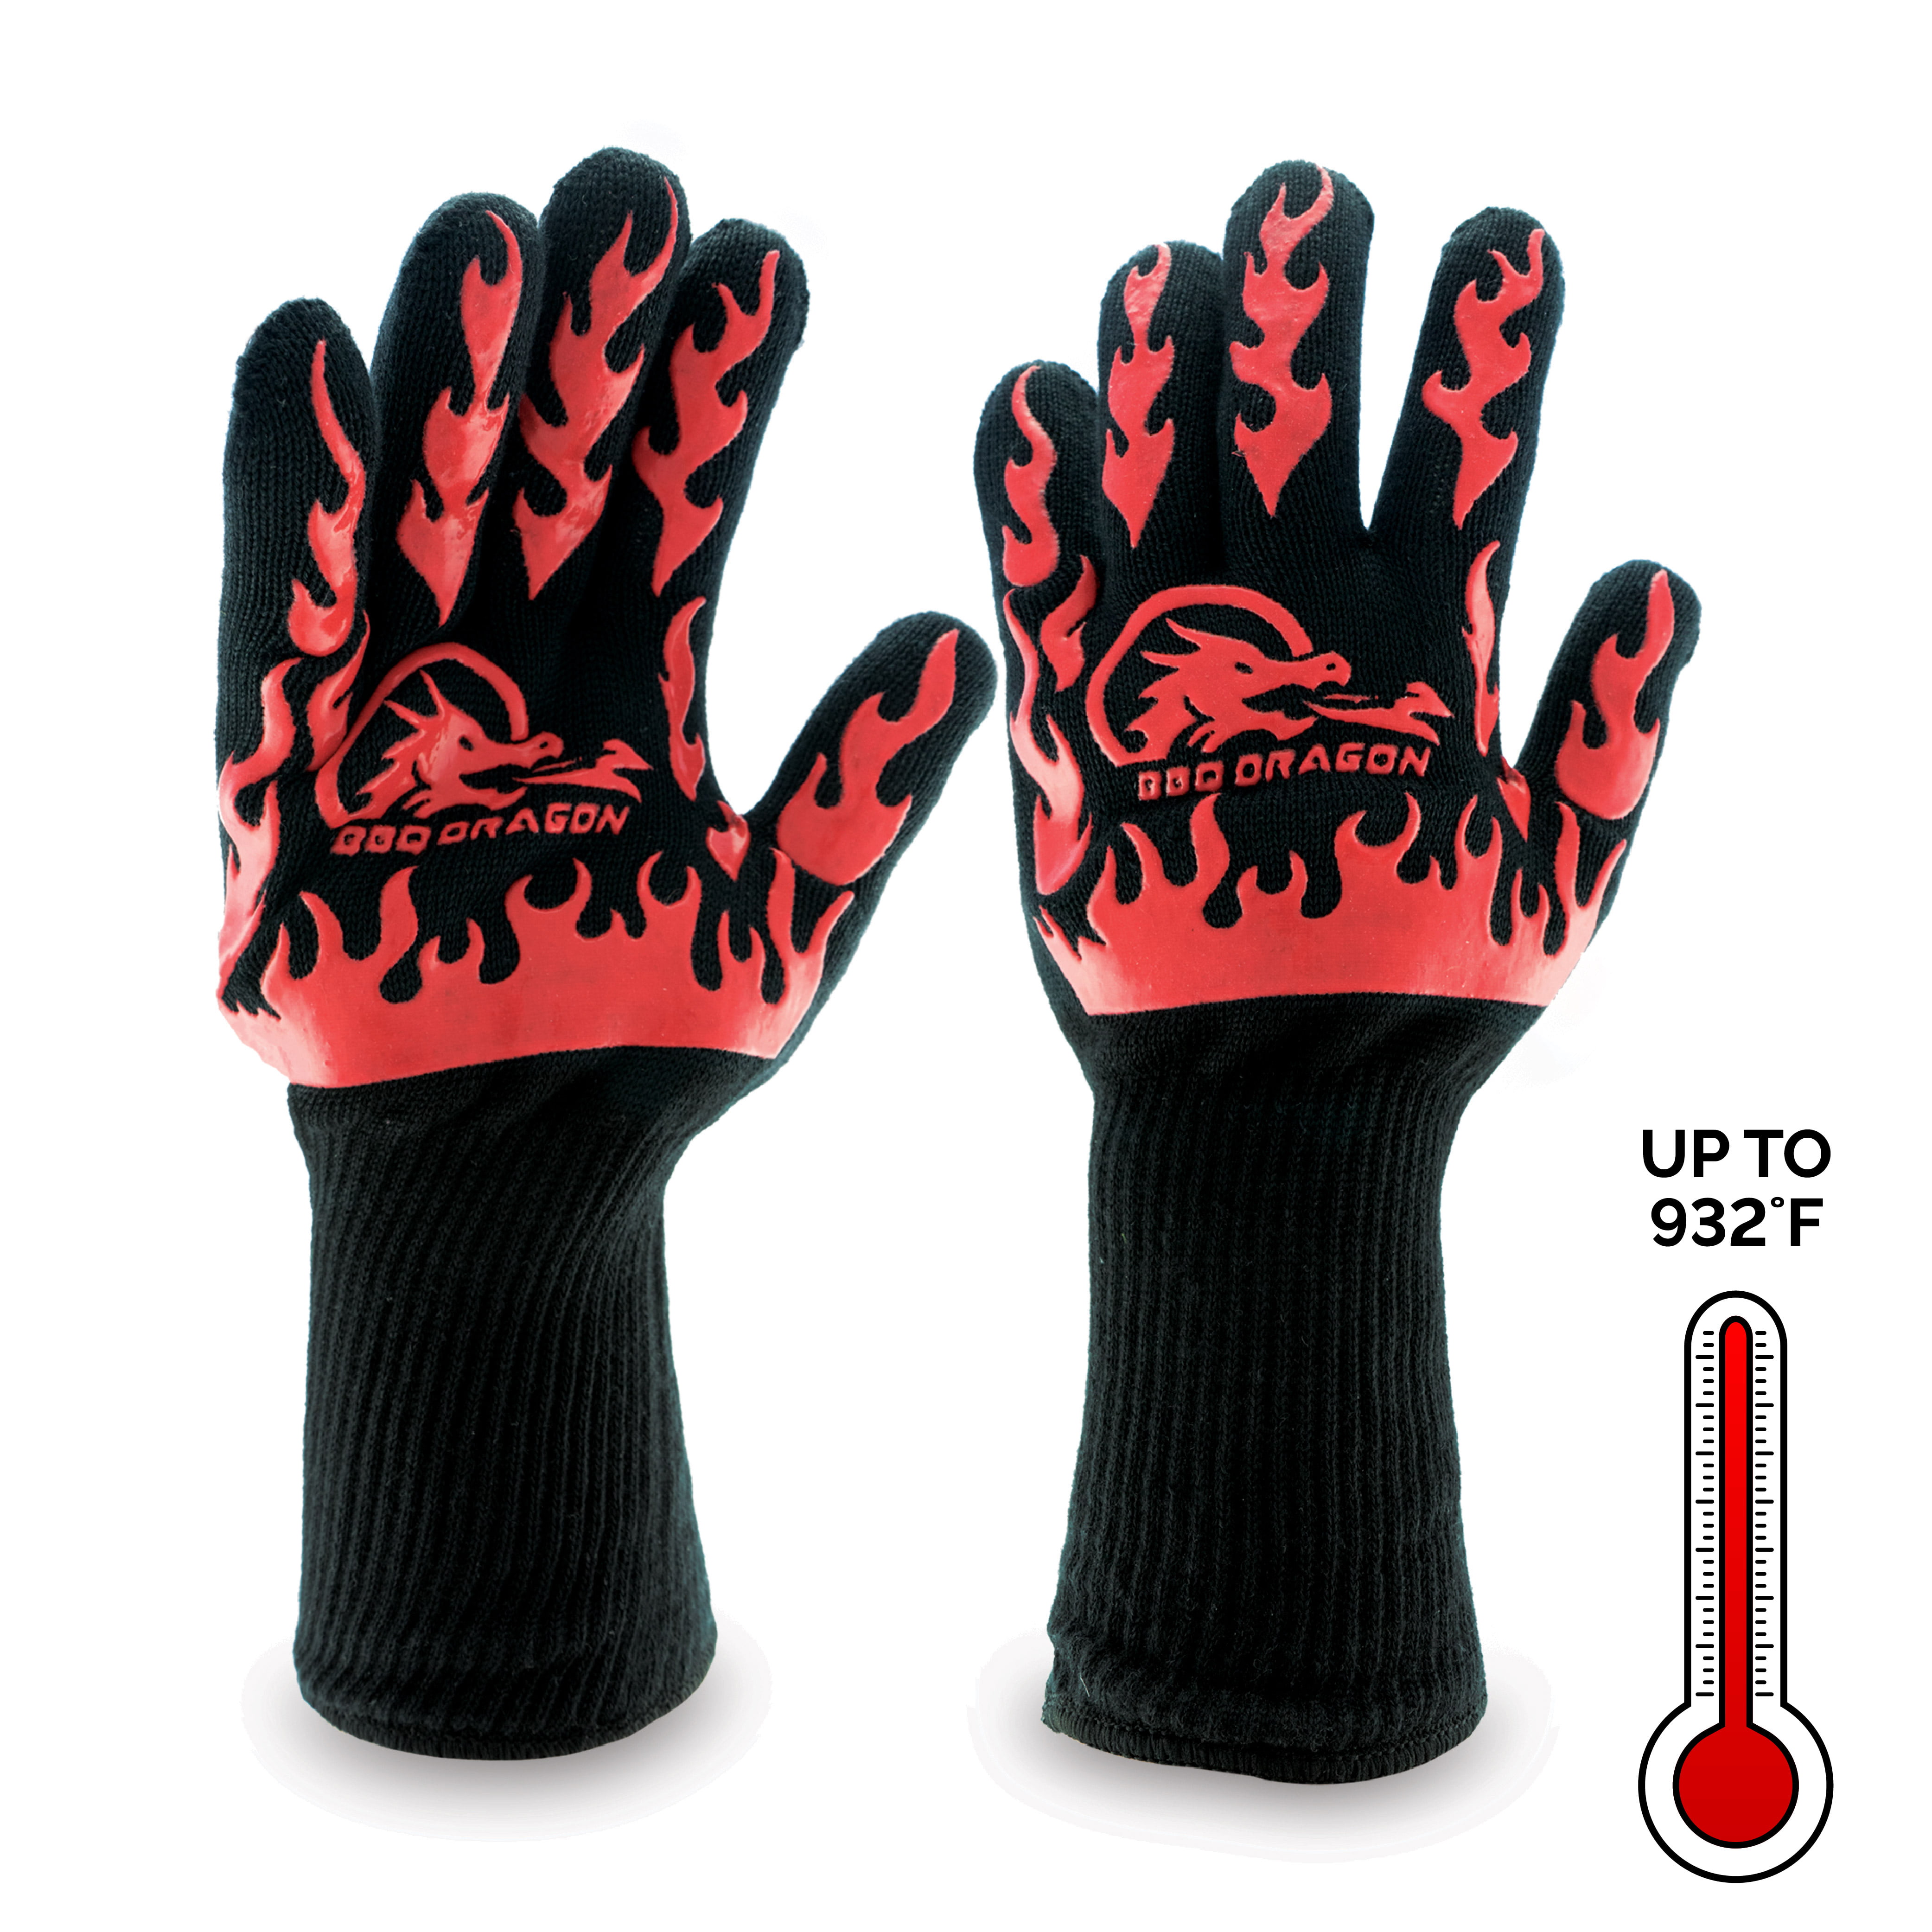 1472℉ Extreme Heat Ultra-Long Wrist Grill Gloves Silicone Non-Slip Cooking Barbecue Oven Glove Non-Slip Cooking Gloves Digital Time BBQ Gloves & Meat Claws Heat Resistant Grill Gloves 